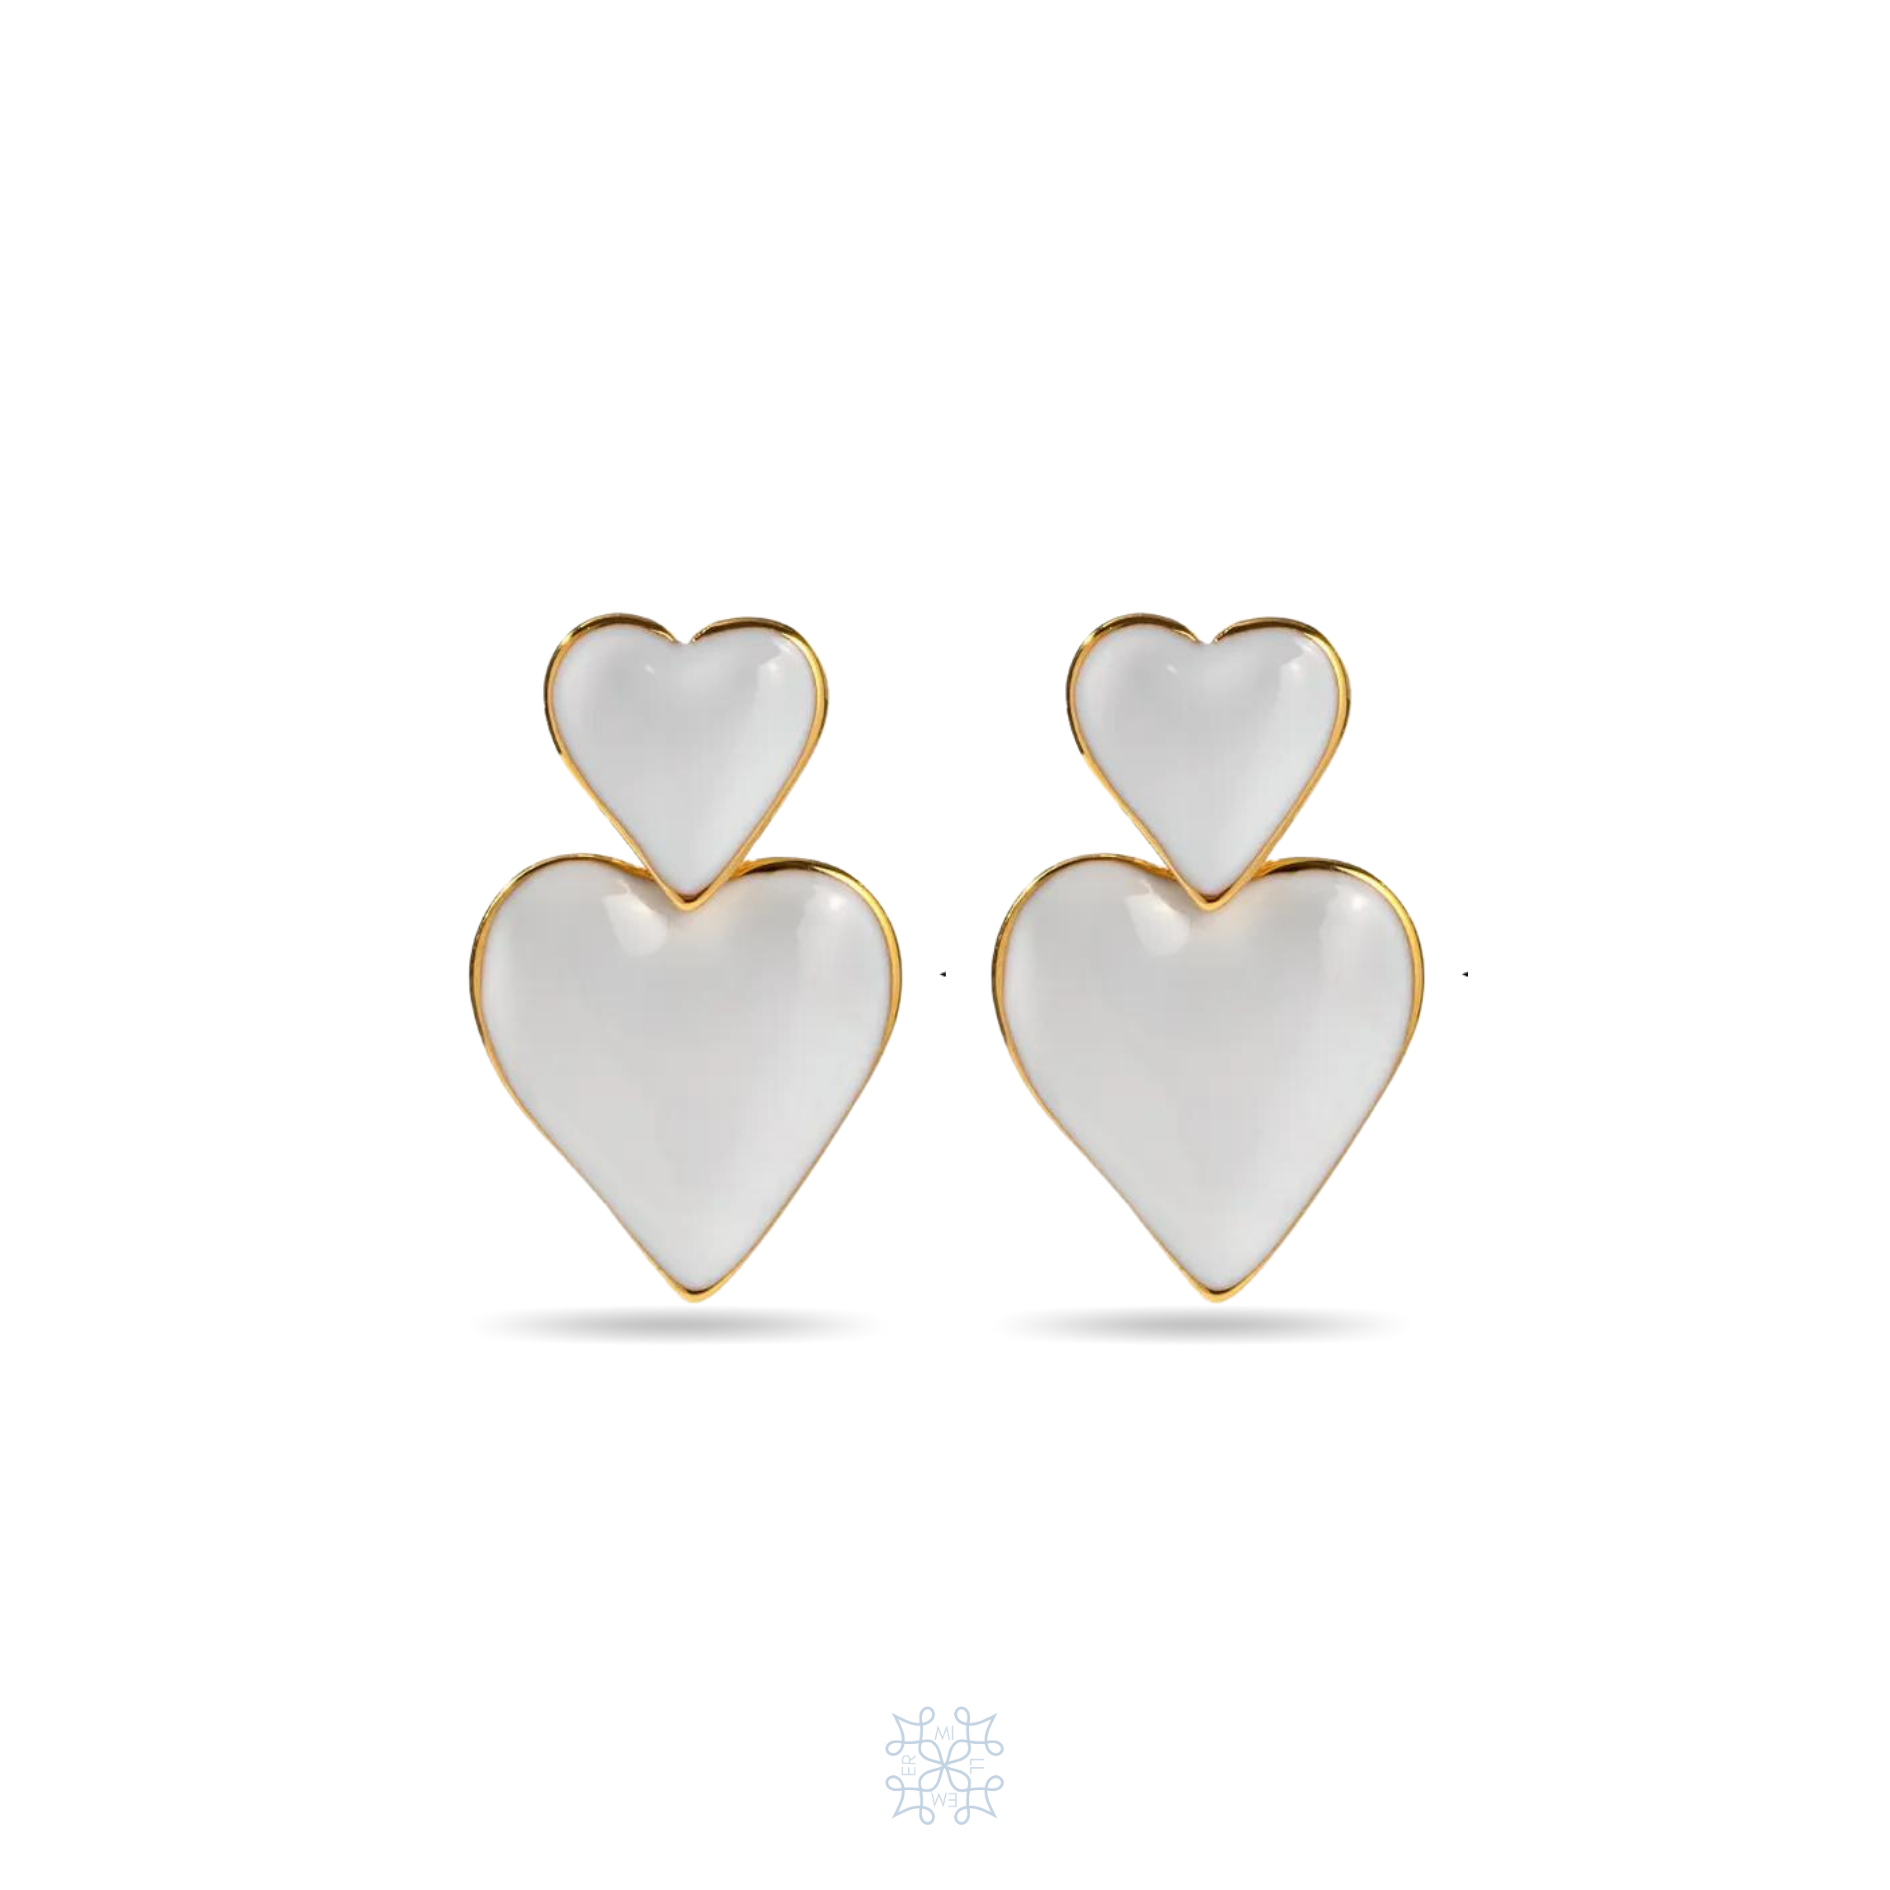 Heart shaped gold earrings. Painted in heart enamel. Two heart attached as adrop earring. Small heart at the top and the bigger heart at the bottom.